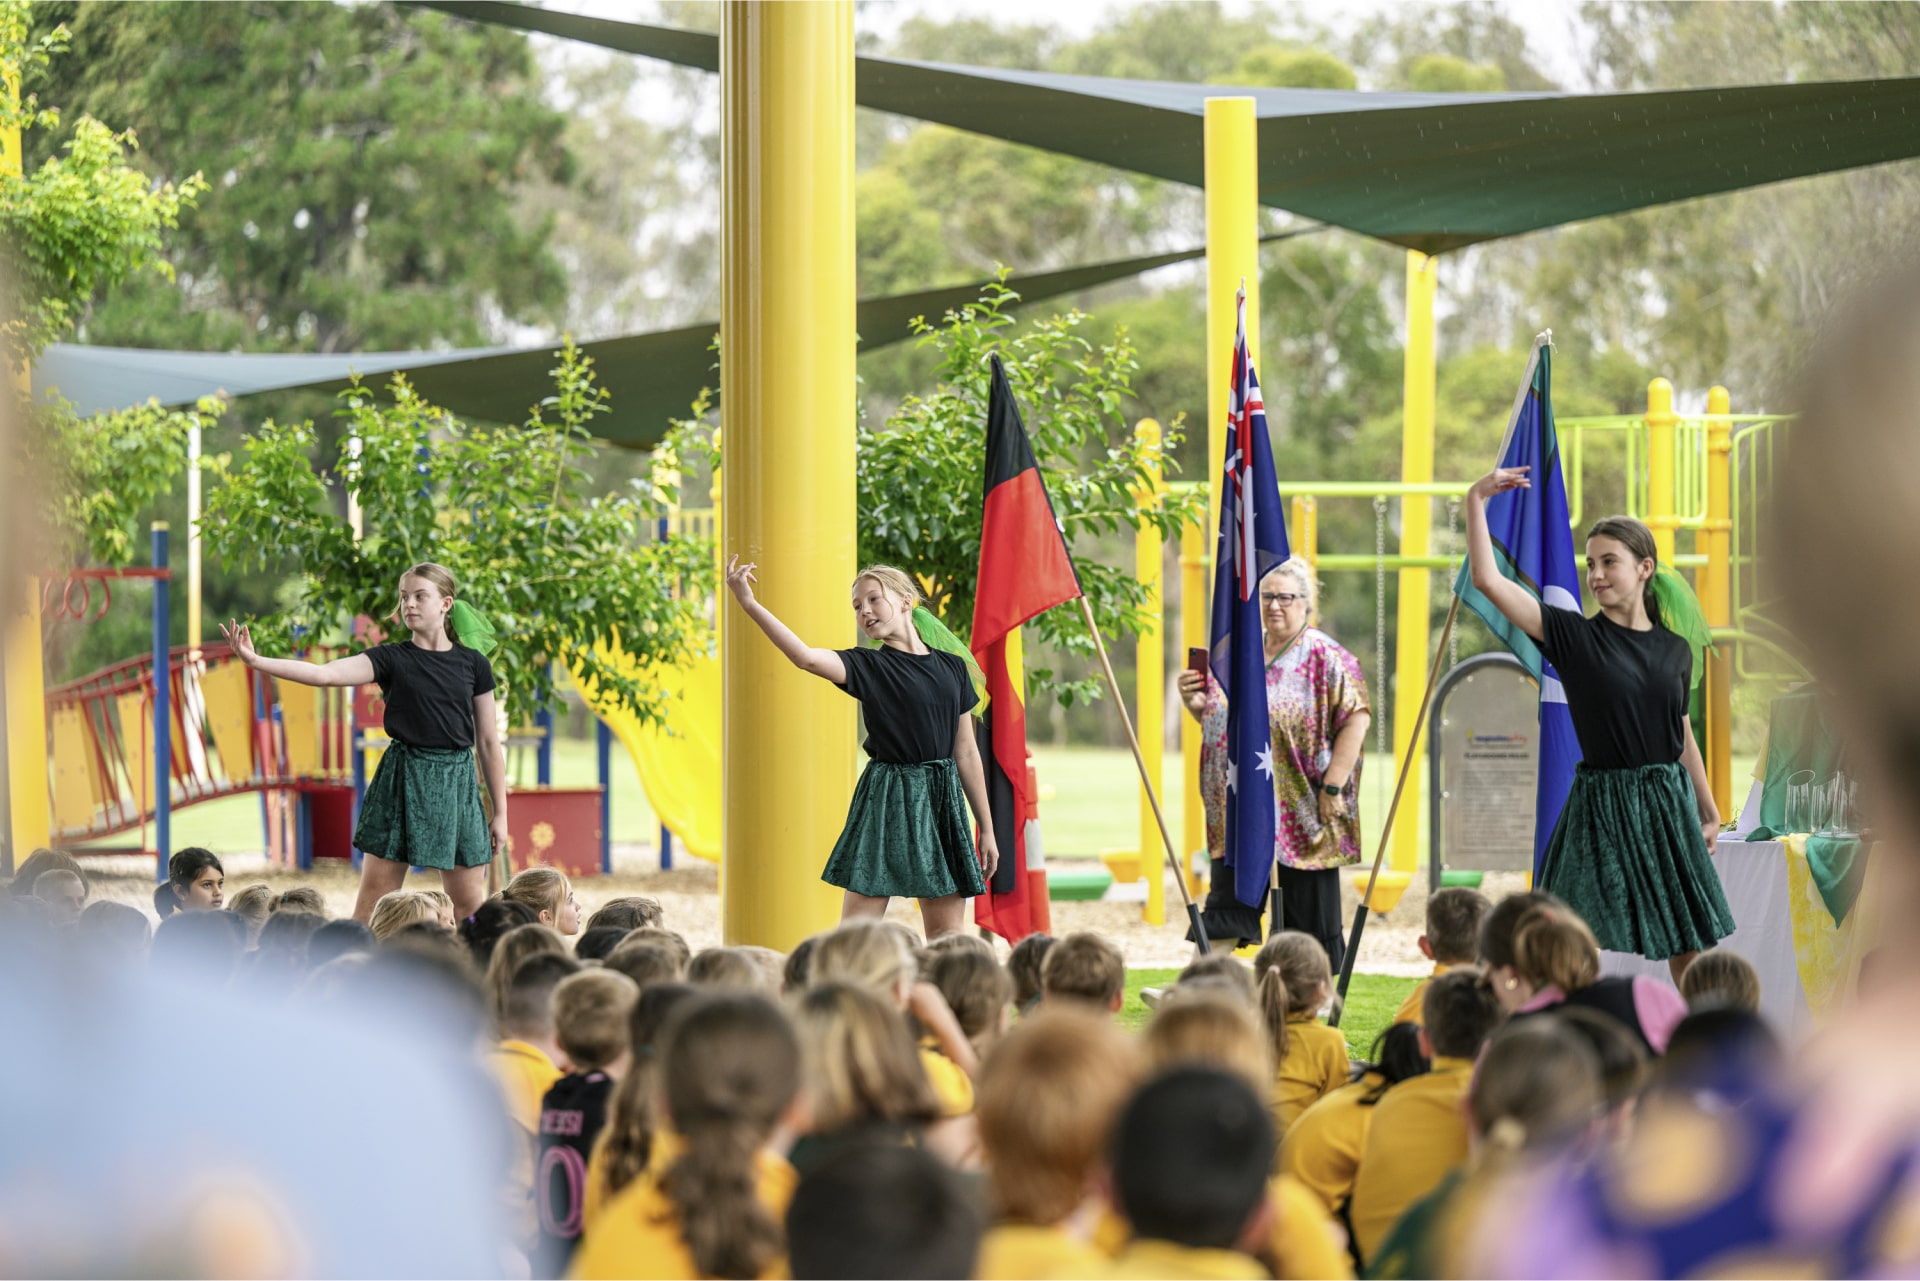 St Bernards Primary School students under steel court cover shade structure